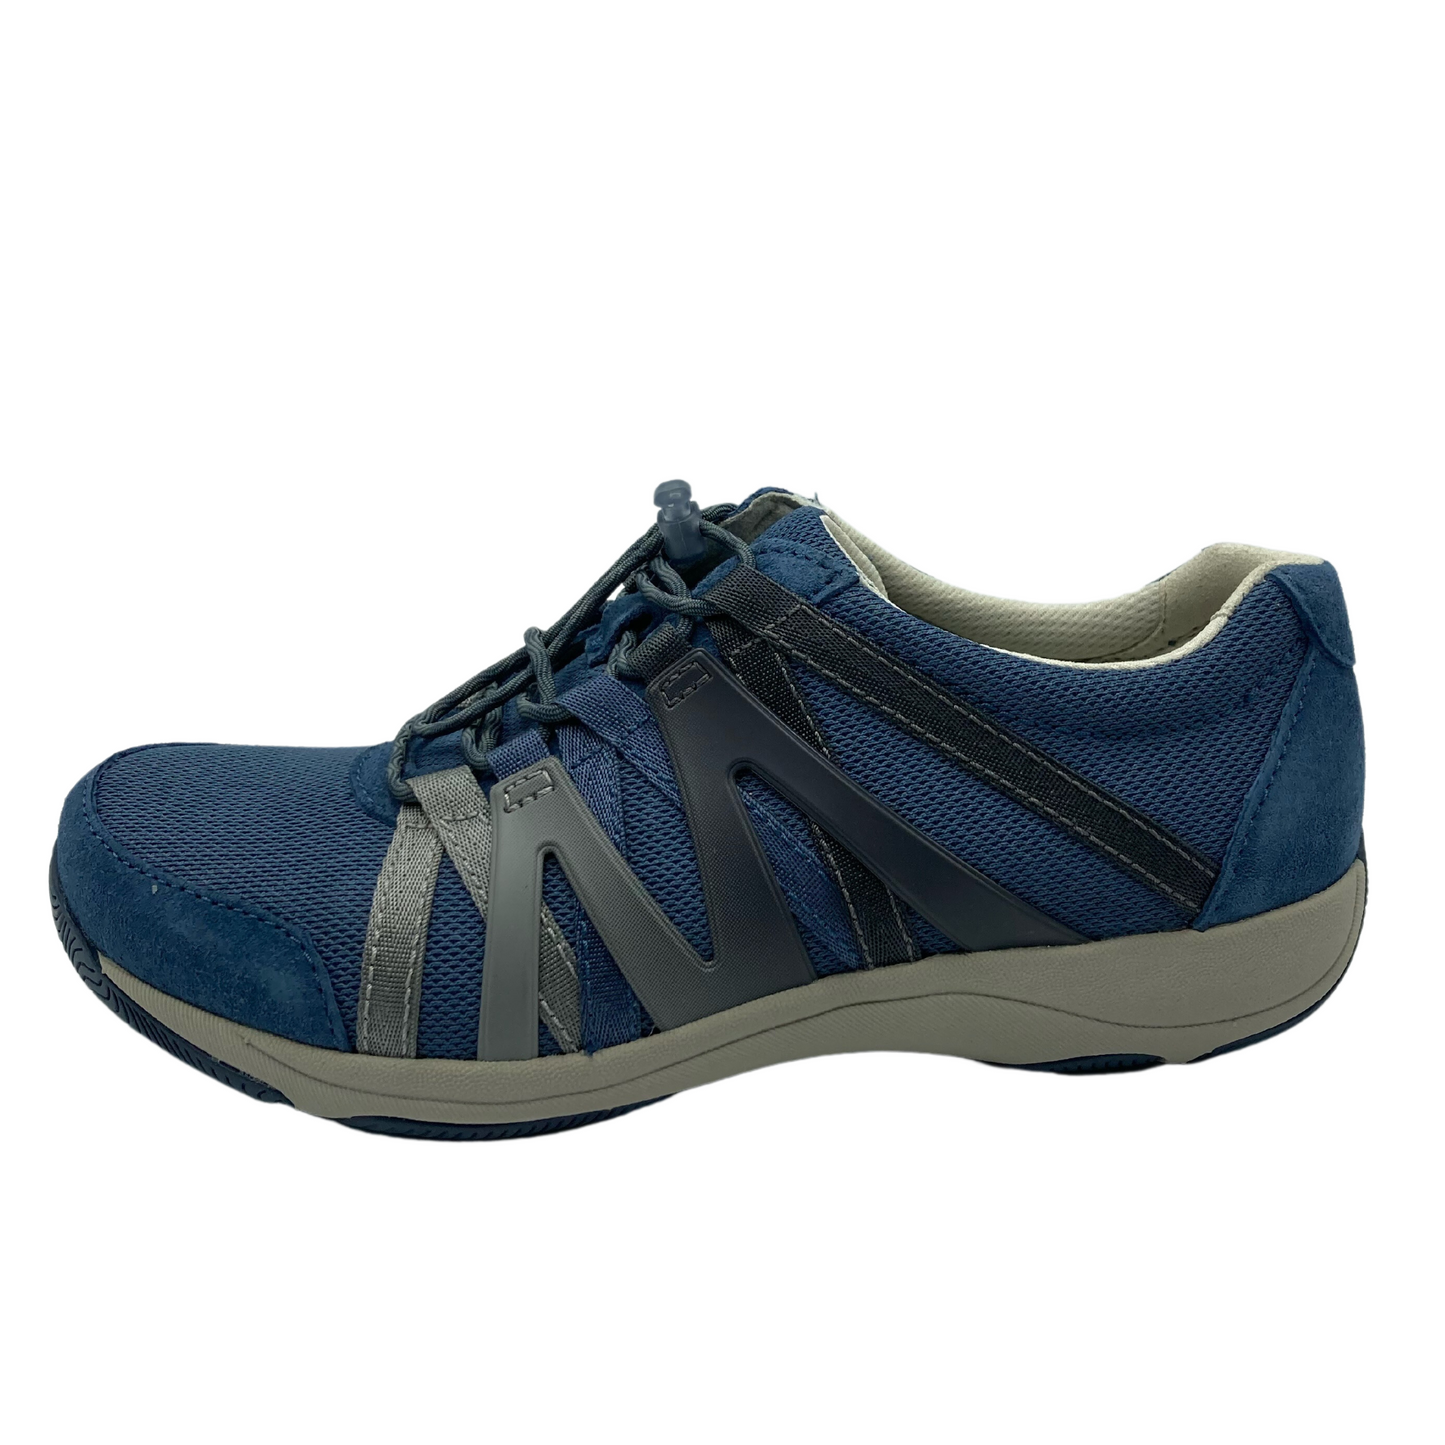 A left side profile of a blue sneaker. The shoe has a white and blue rubber sole, a mesh top, suede detailing, and an Ombre zig-zagged side pattern.